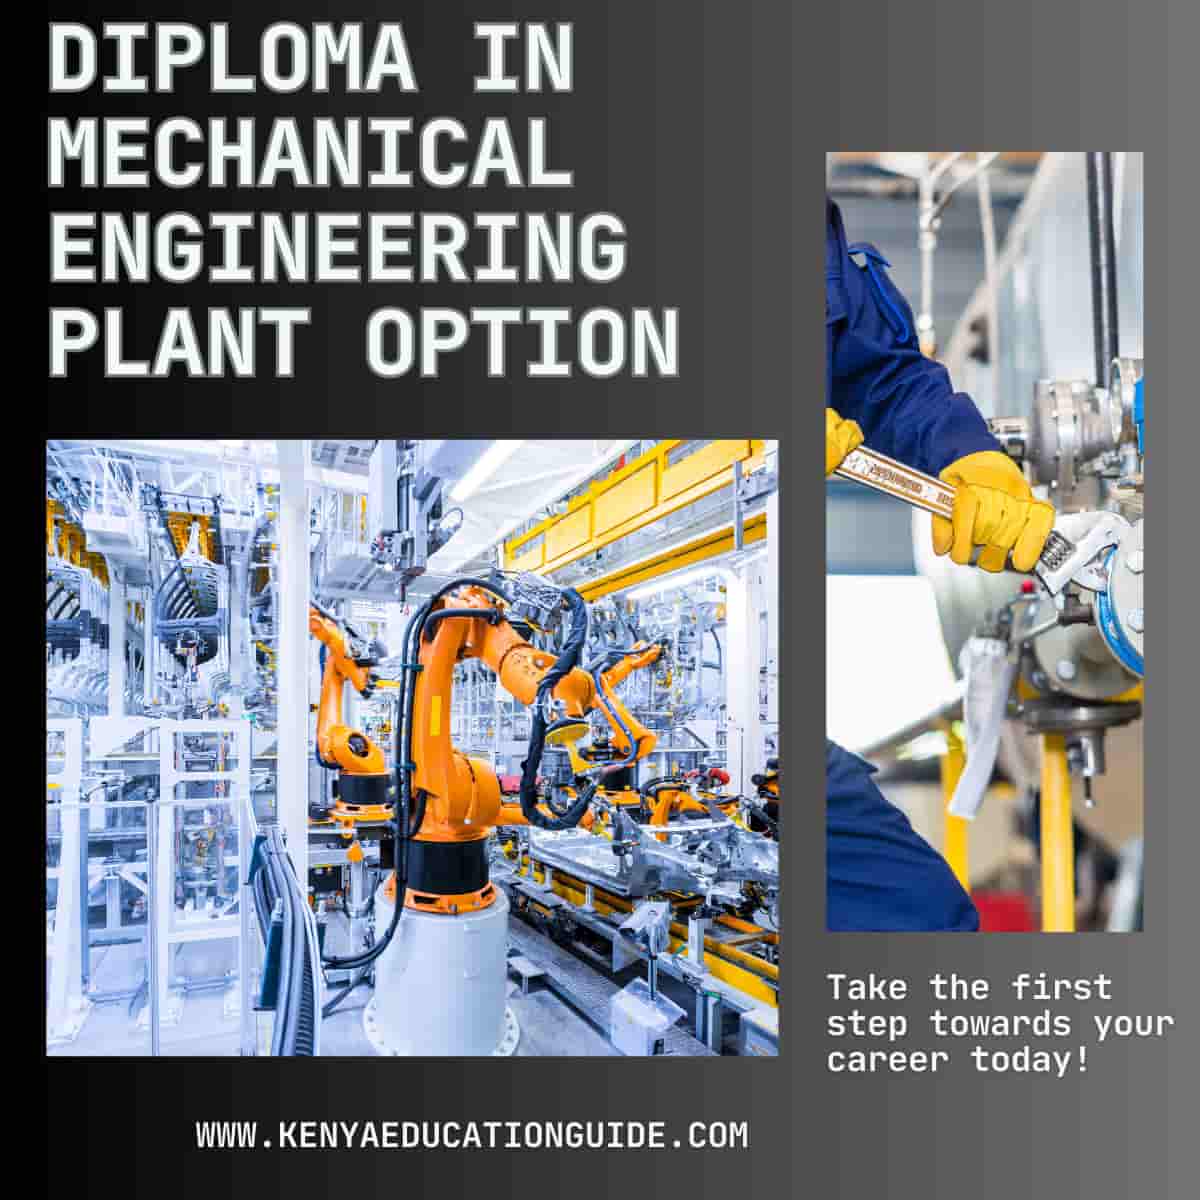 Diploma in Mechanical Engineering Plant Option